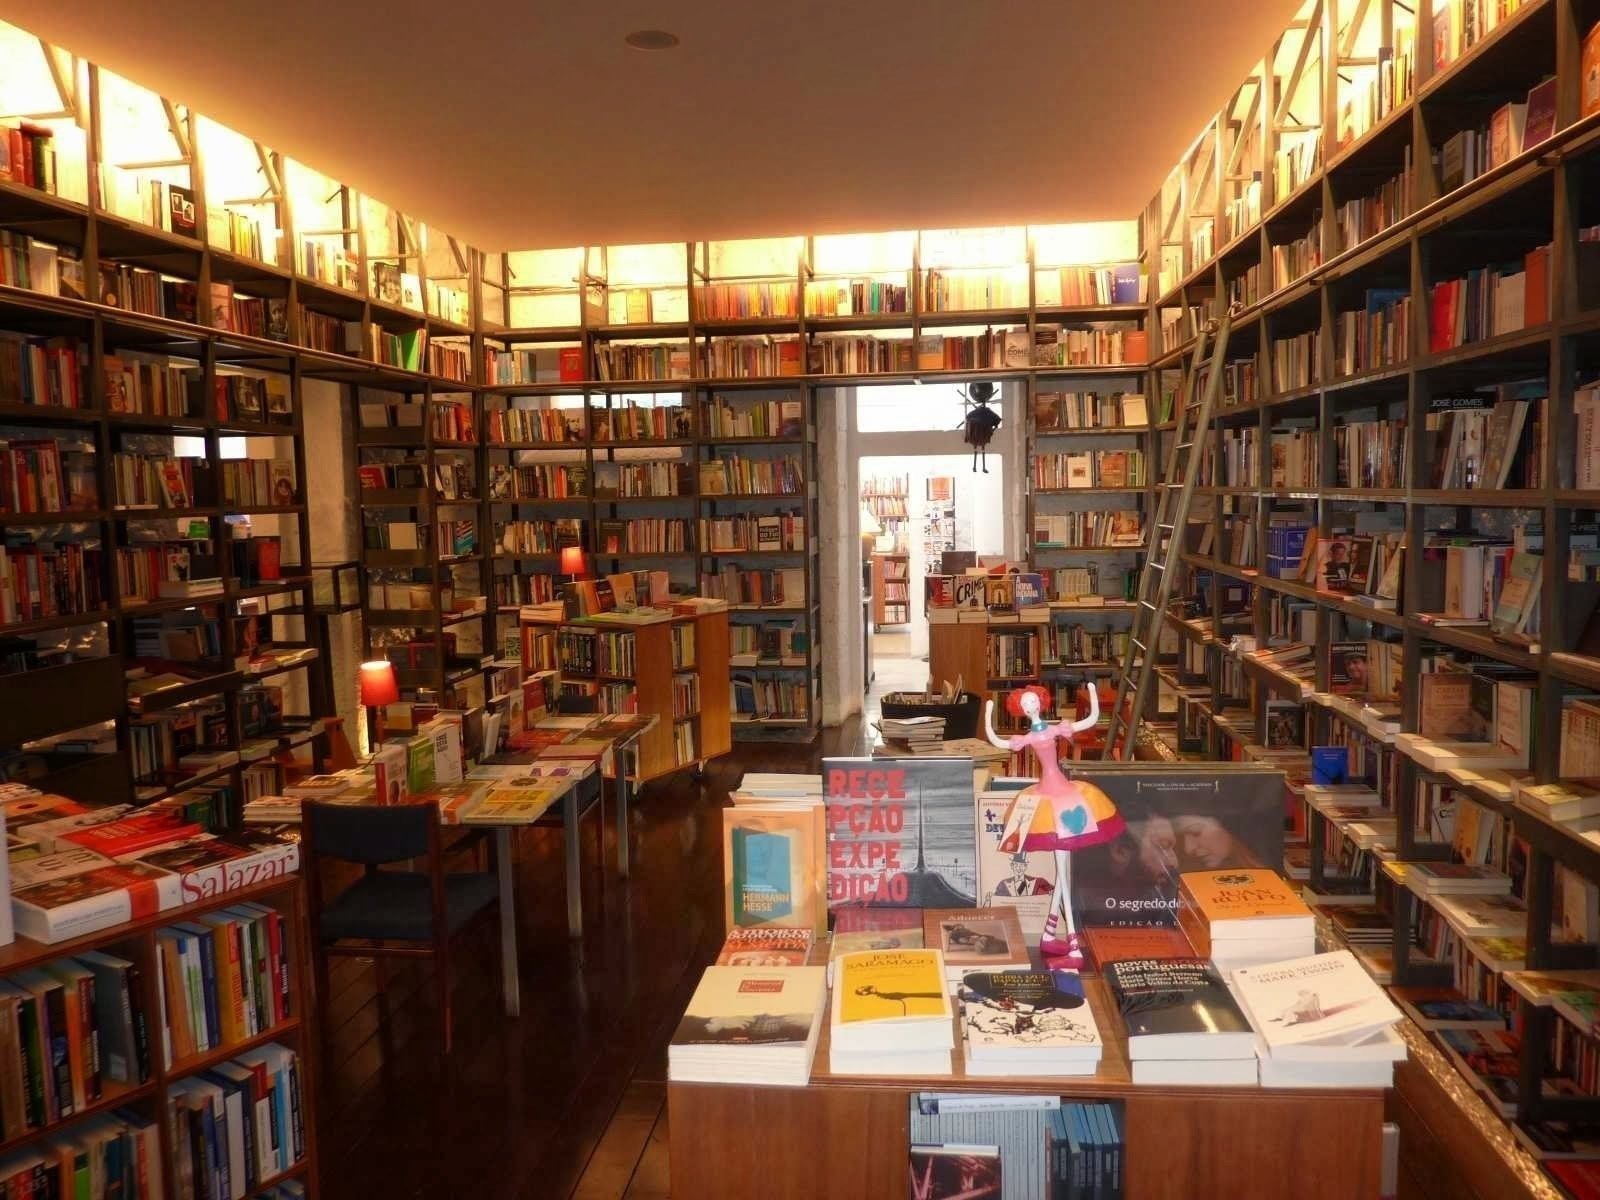 <span class="translation_missing" title="translation missing: en.meta.location_title, location_name: 100° Página Book store, city: Braga">Location Title</span>